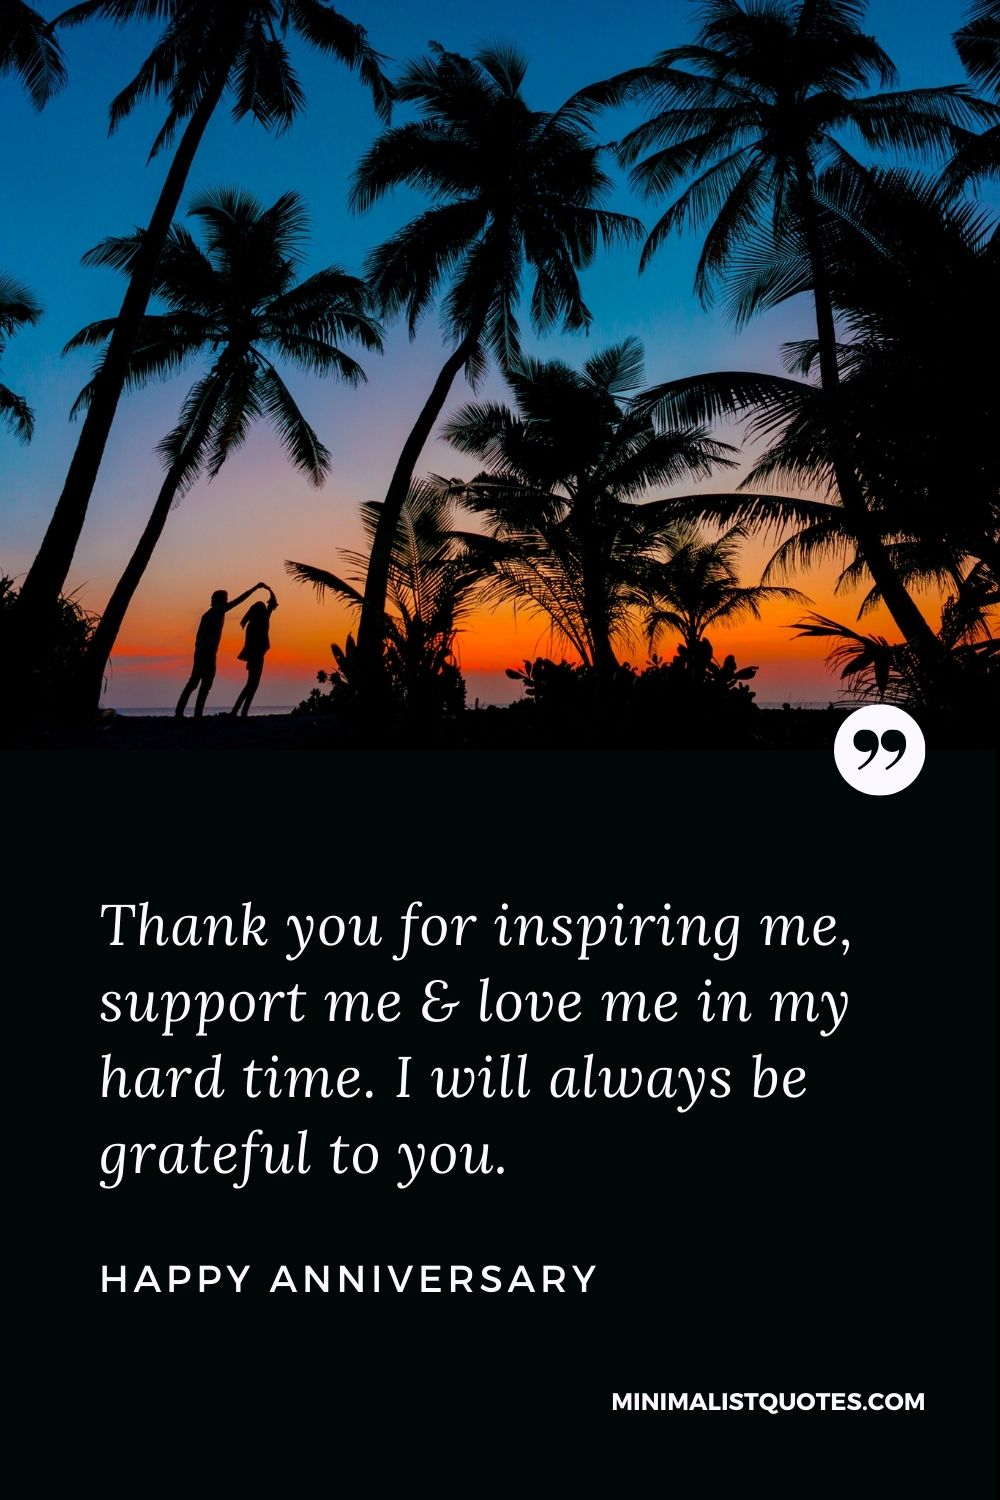 Thank you for inspiring me, support me & love me in my hard time ...